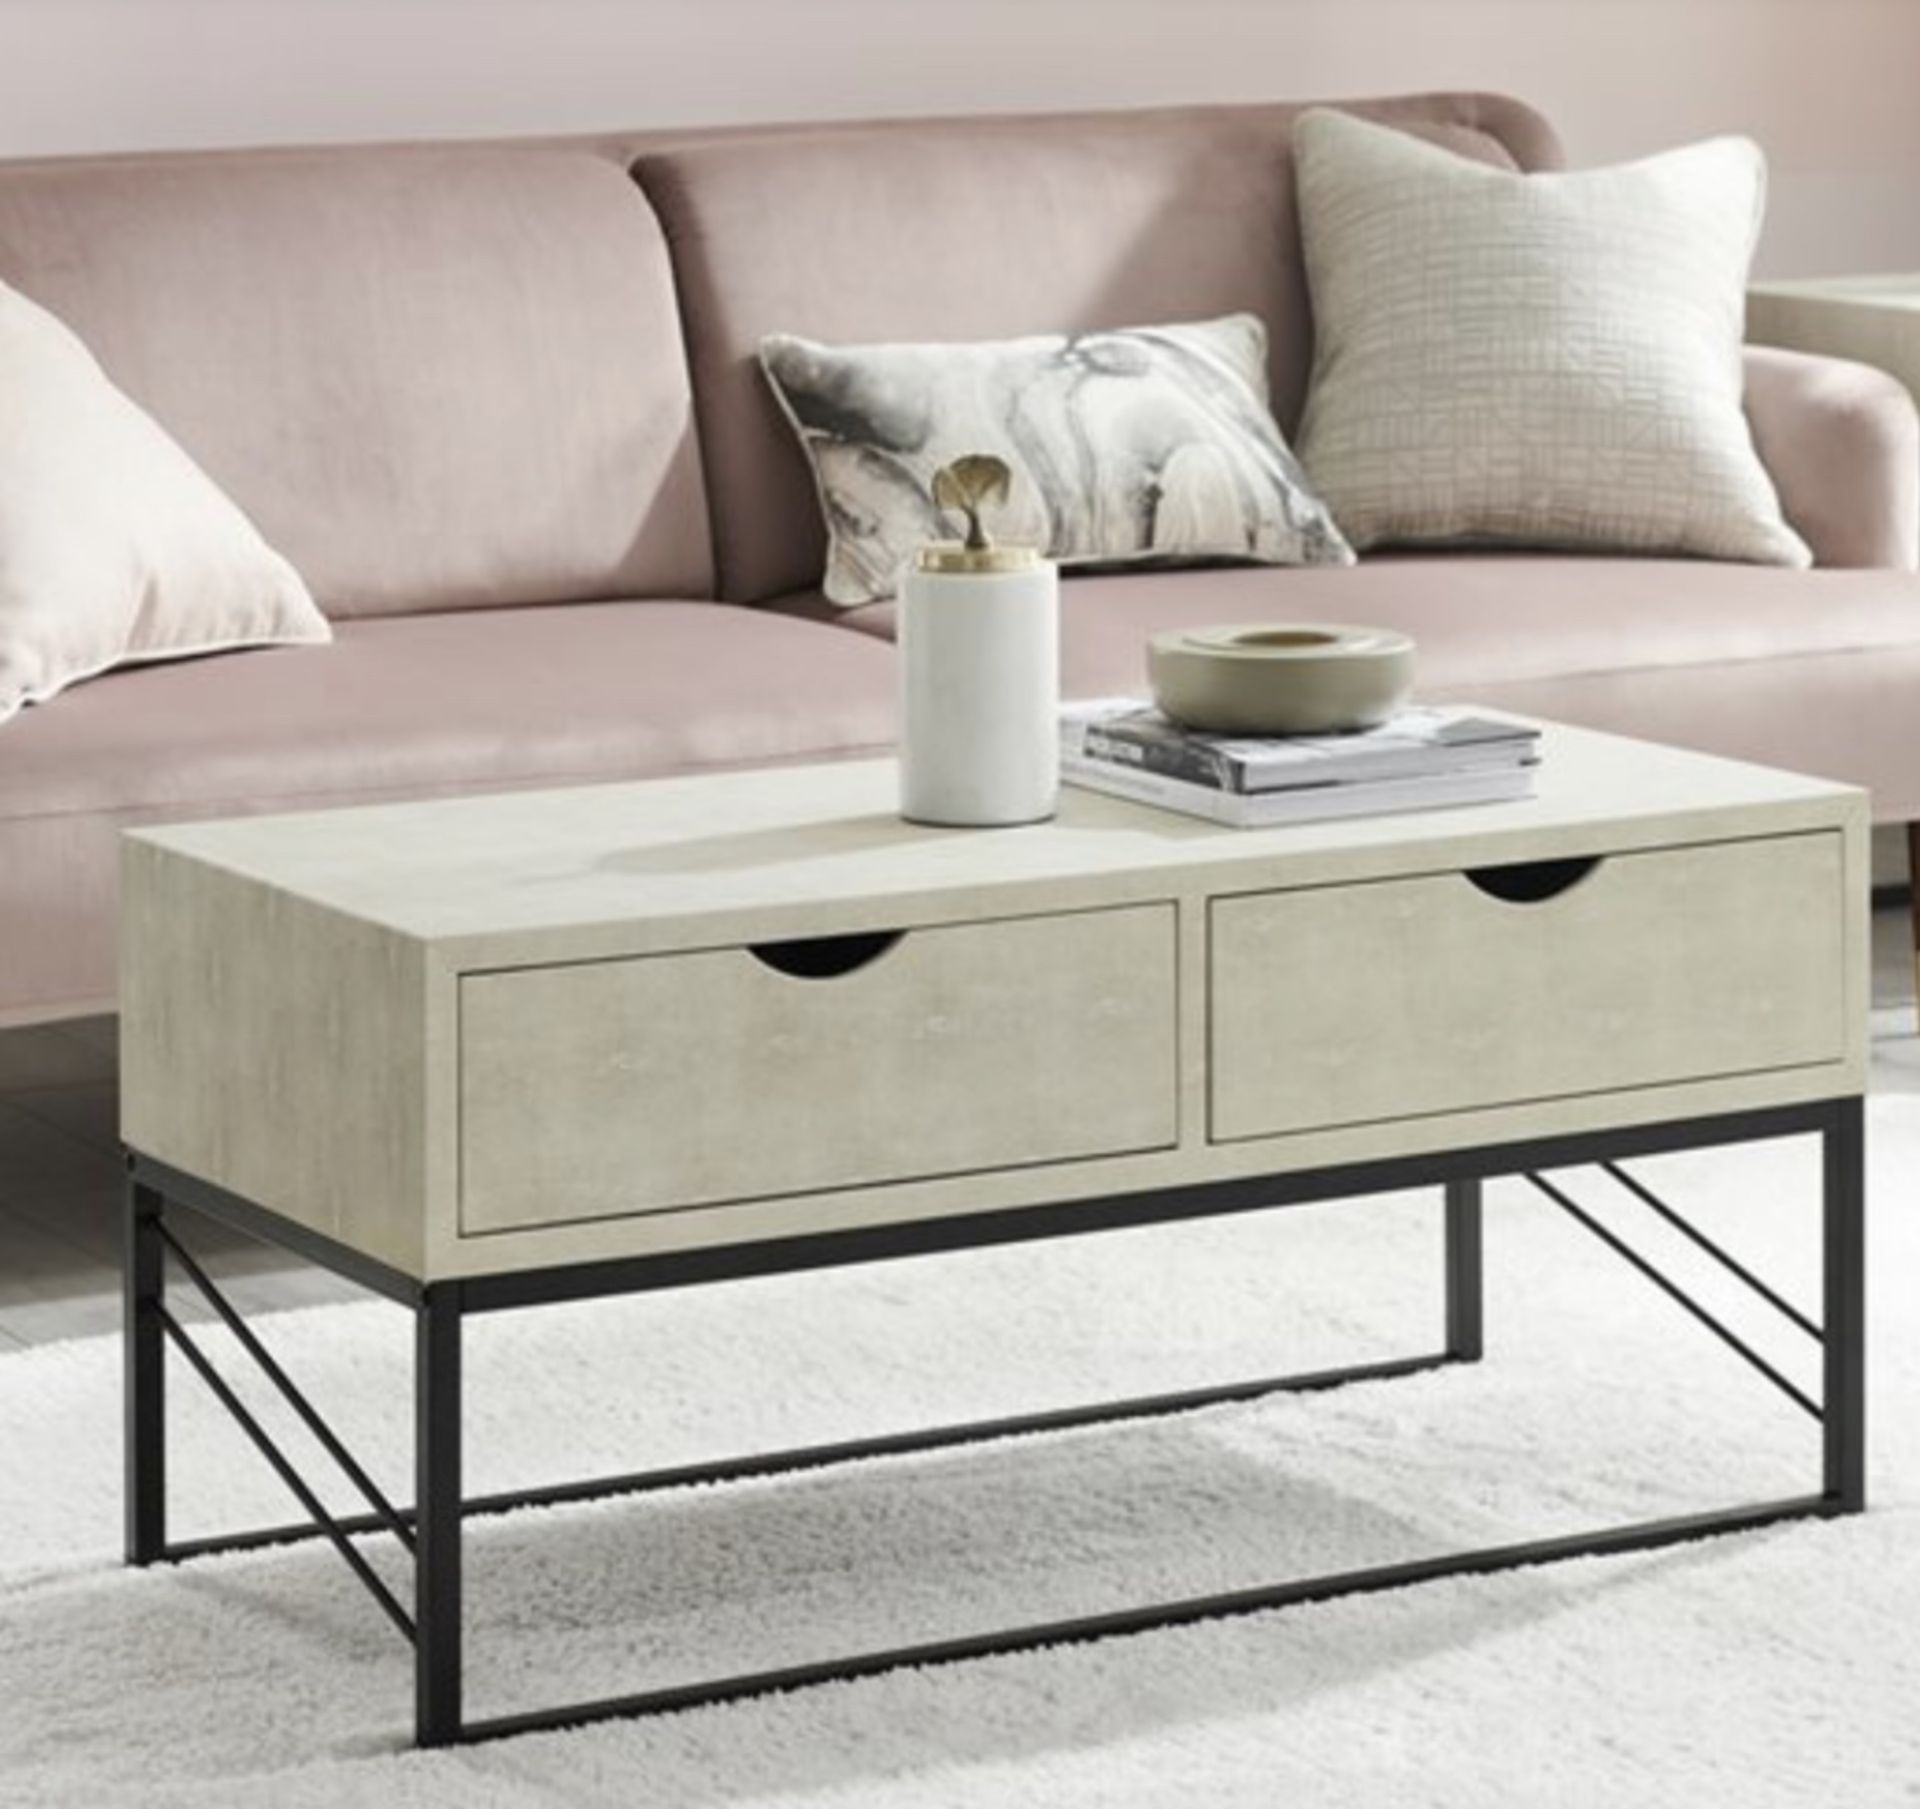 EYNESFORD 2 DRAWER FAUX SHAGREEN COFFEE TABLE IN OFF WHITE - RRP £349